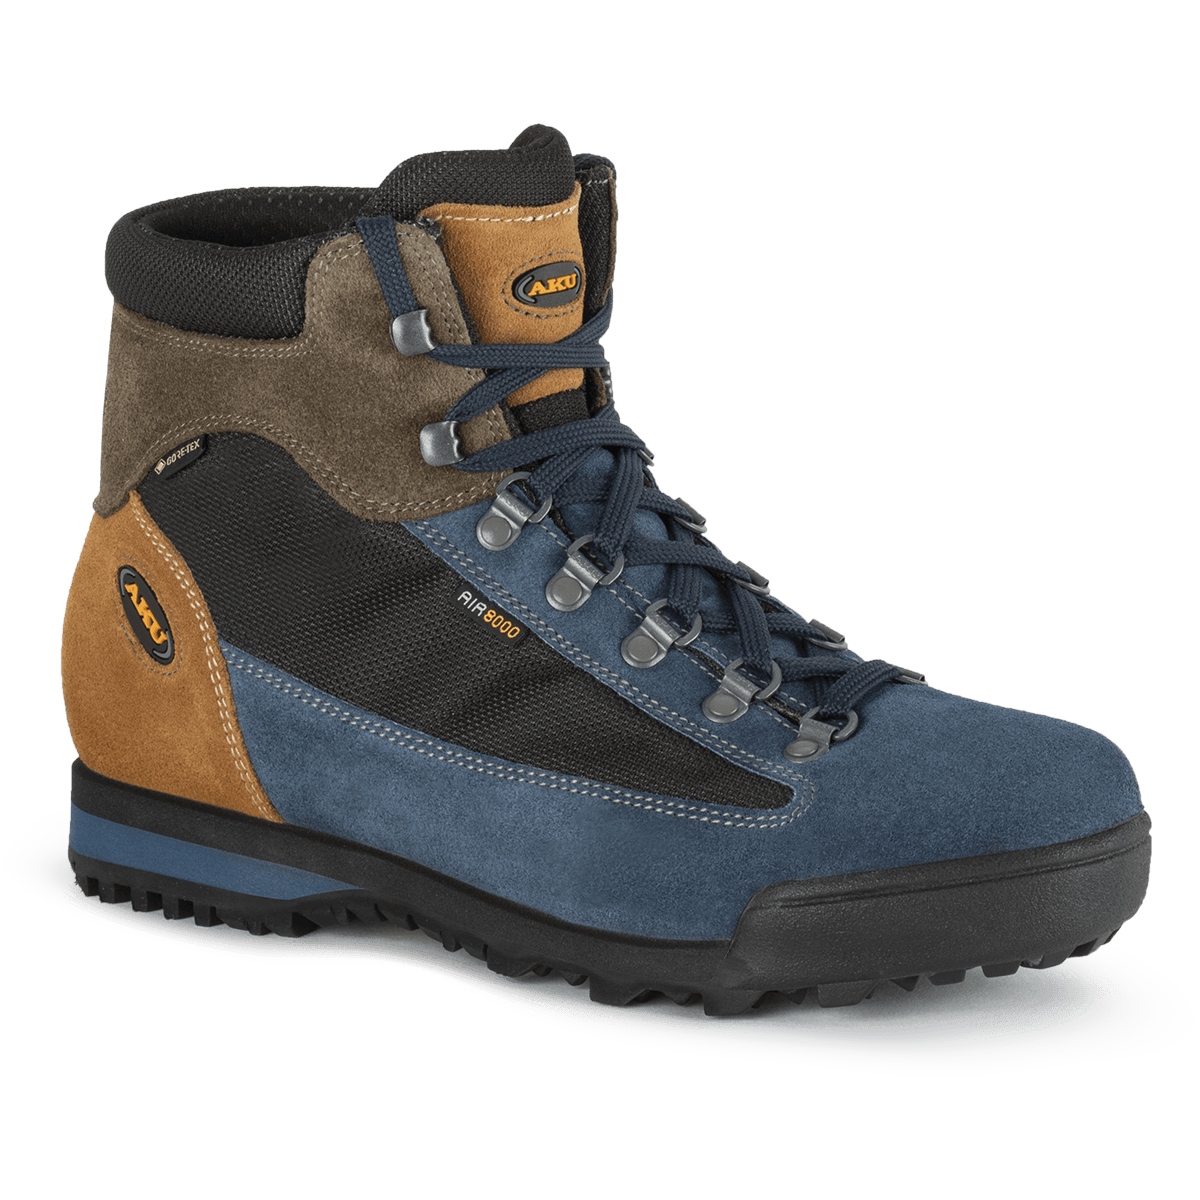 Picture of AKU Slope Original GTX Shoes - Anthracite/Blue